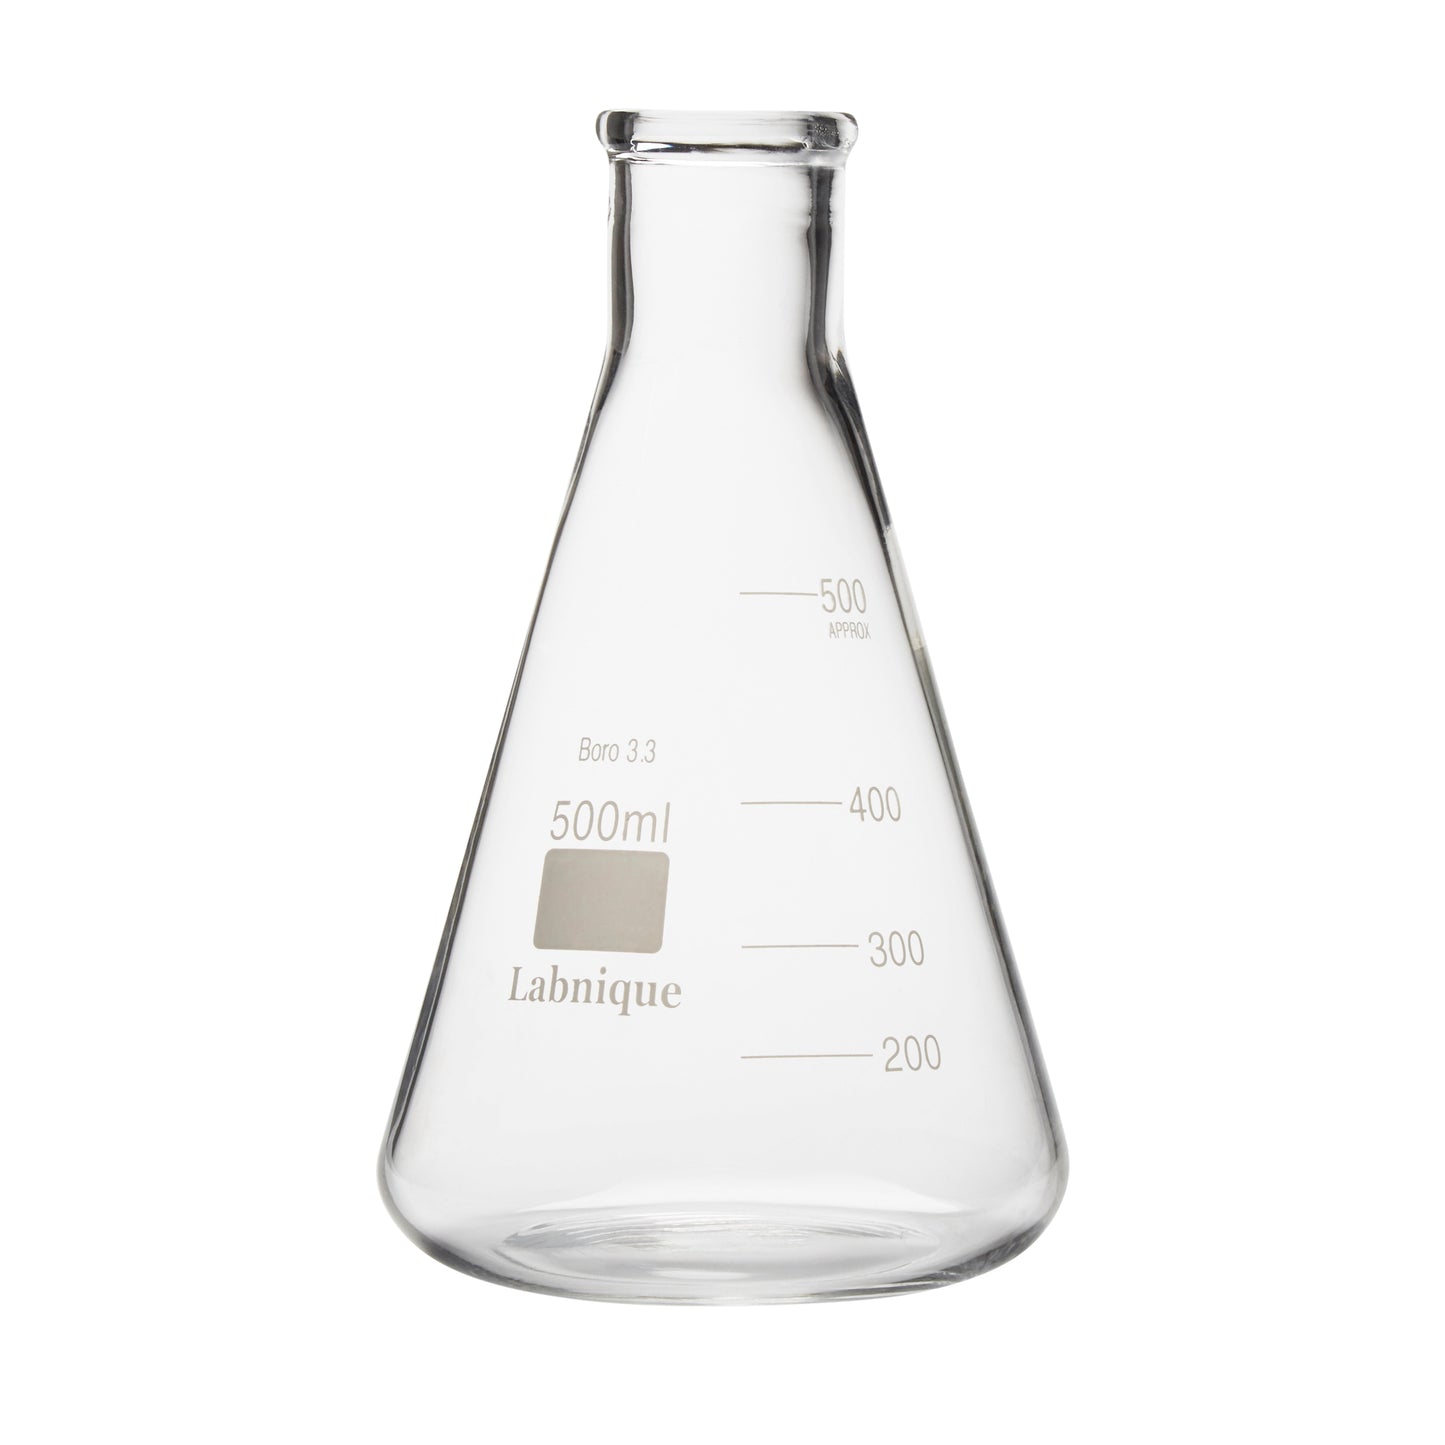 Glass Conical Flask/Erlenmeyer Flask with Narrow Mouth, 500ml (Case of 32)